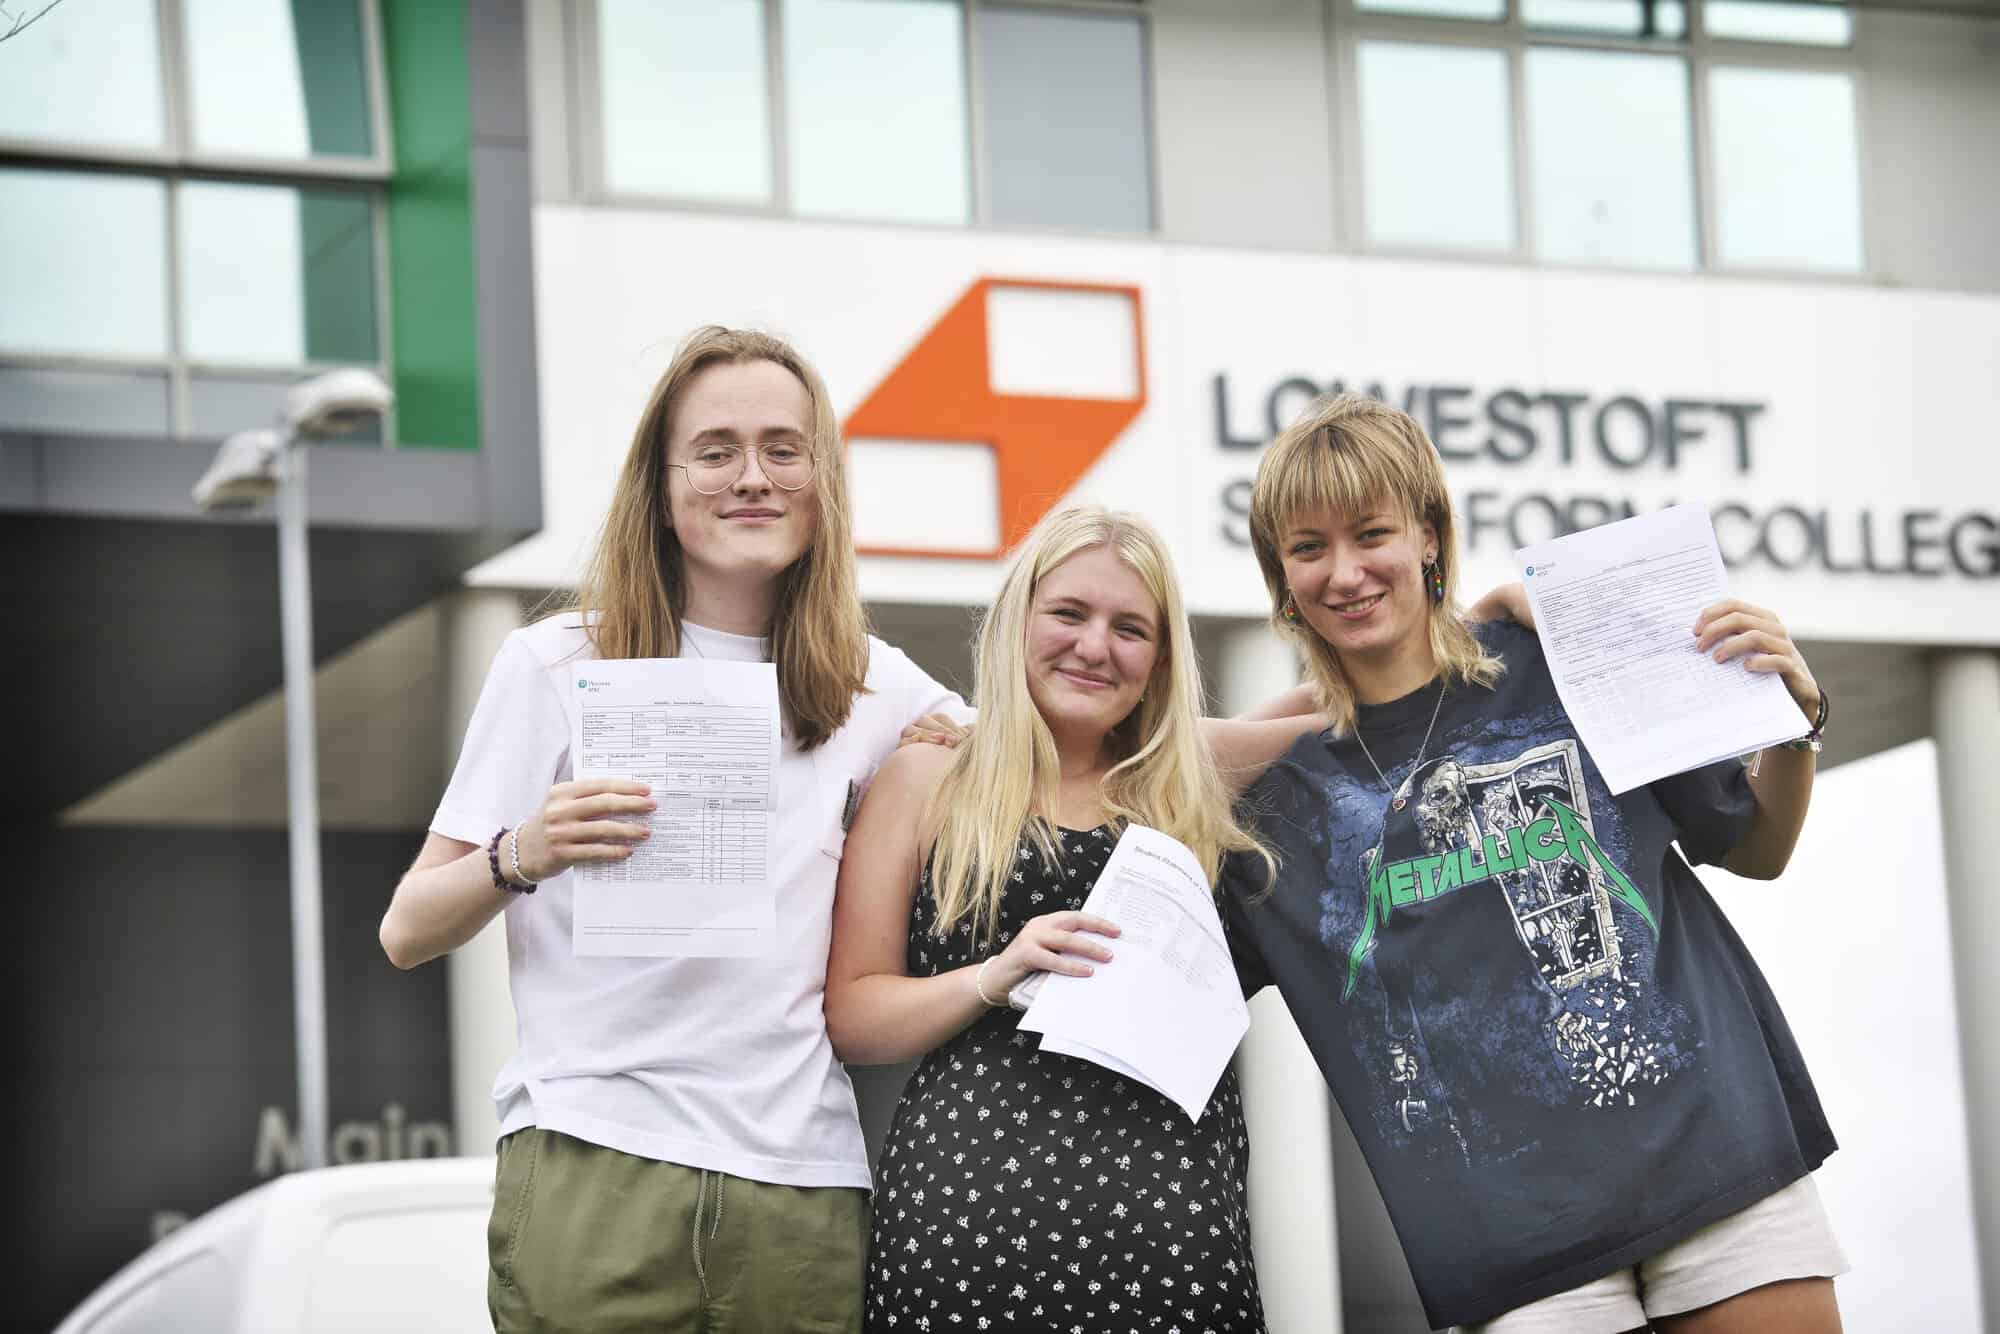 Lowestoft Sixth Form College, Results Day 2023